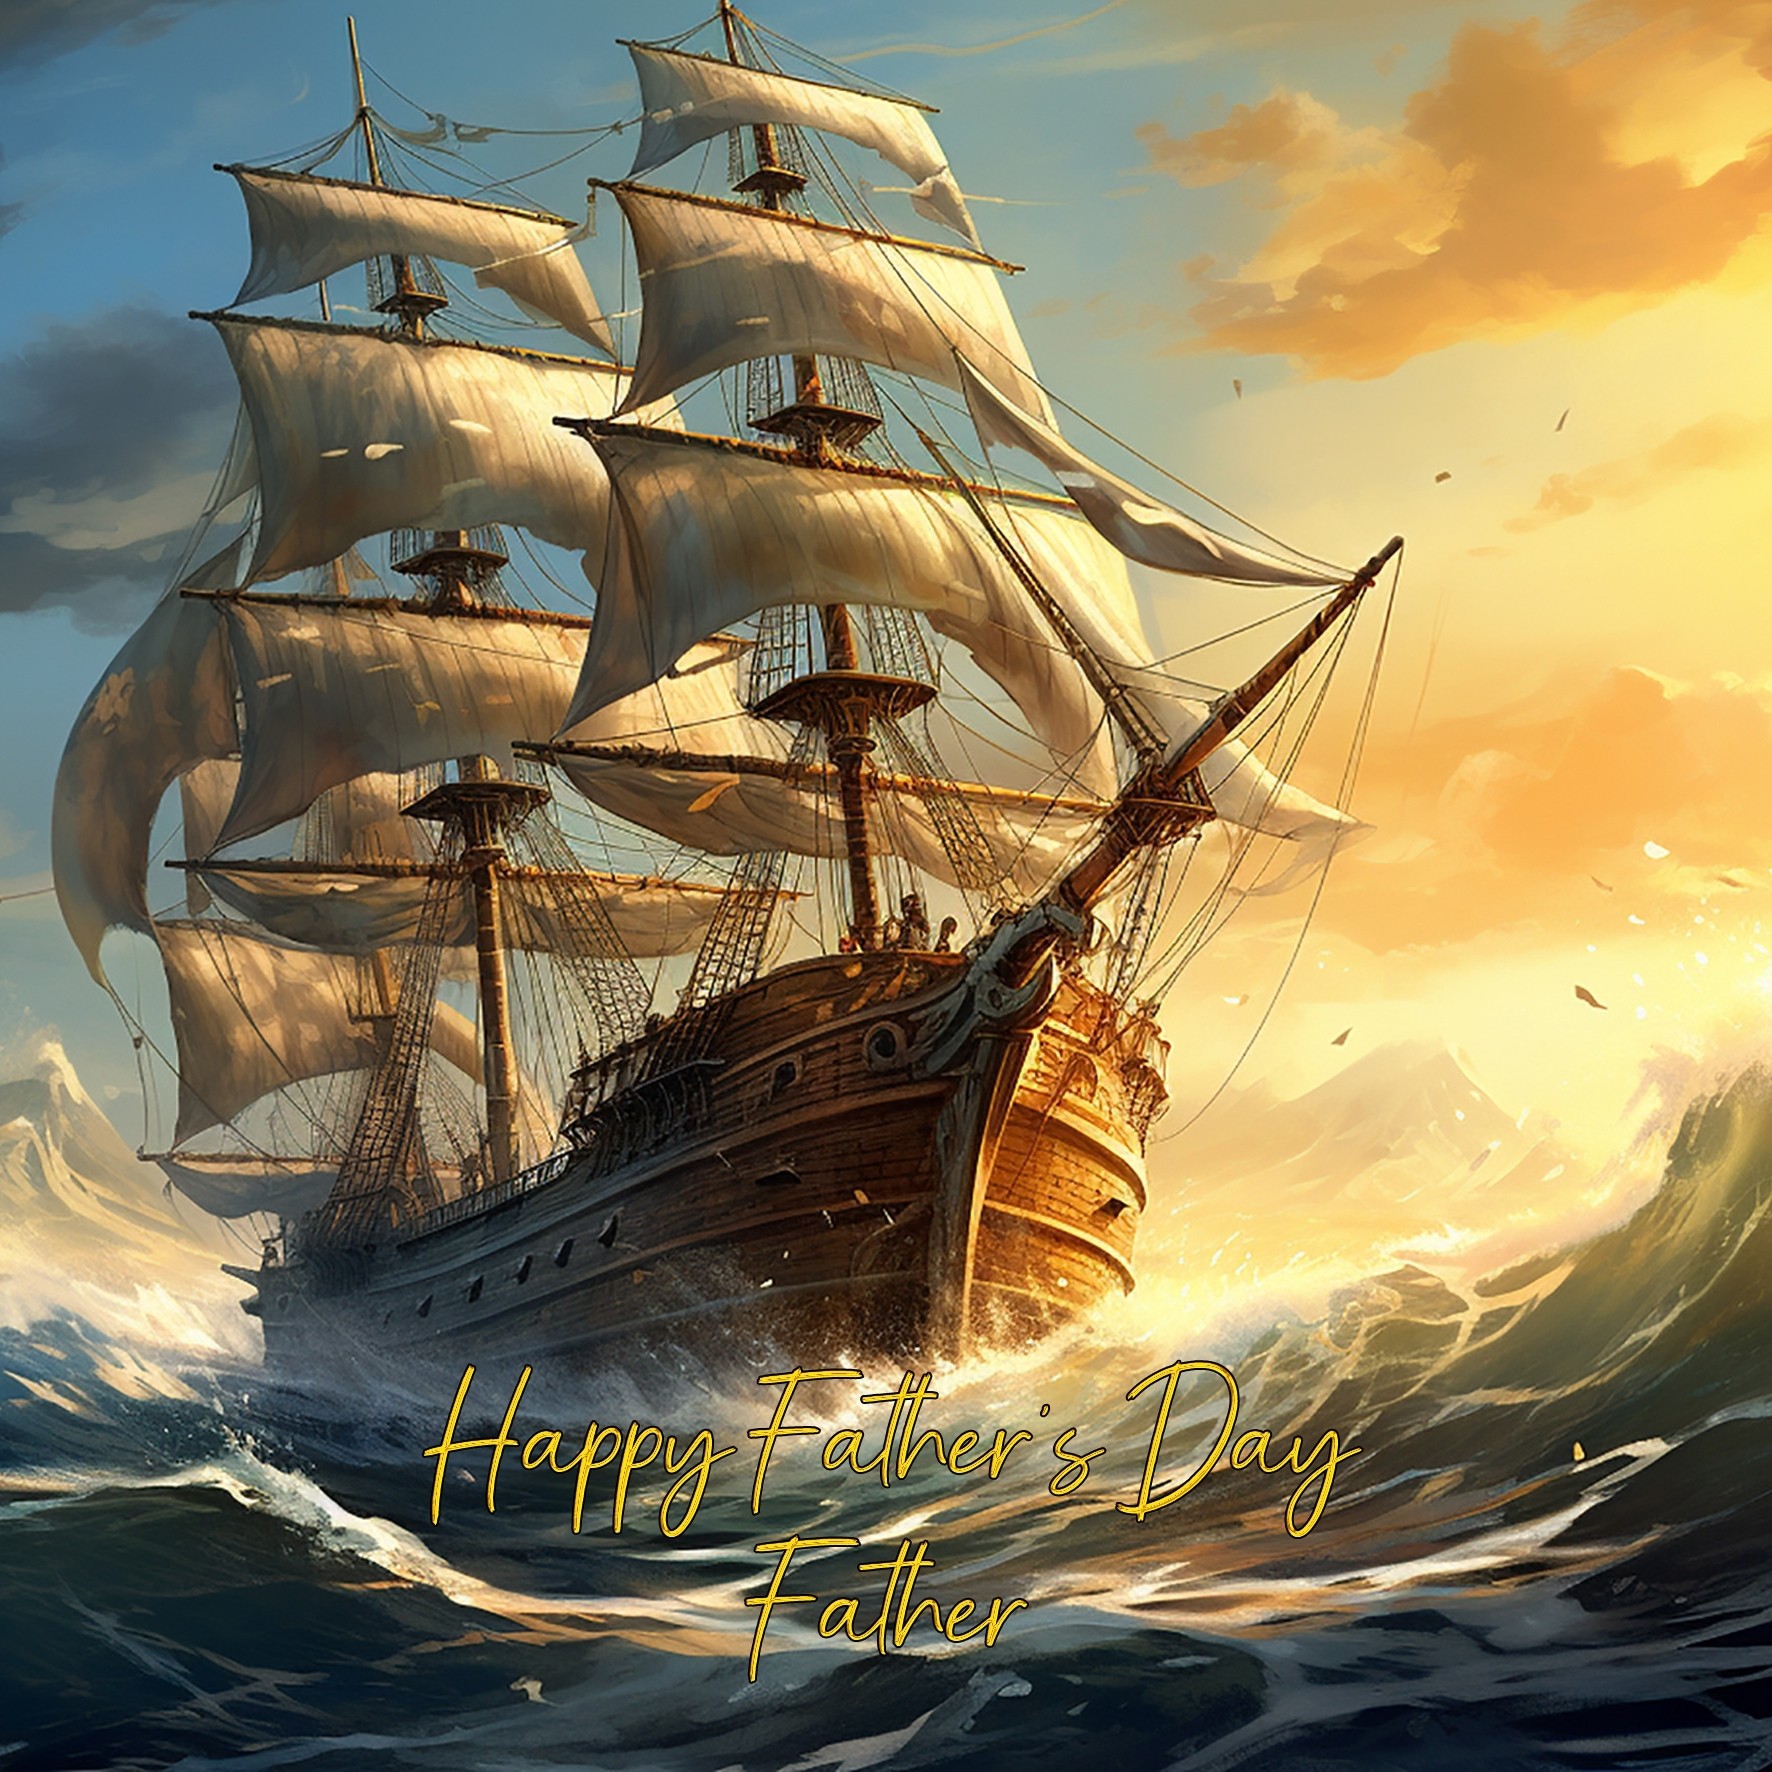 Ship Scenery Art Square Fathers Day Card For Father (Design 4)